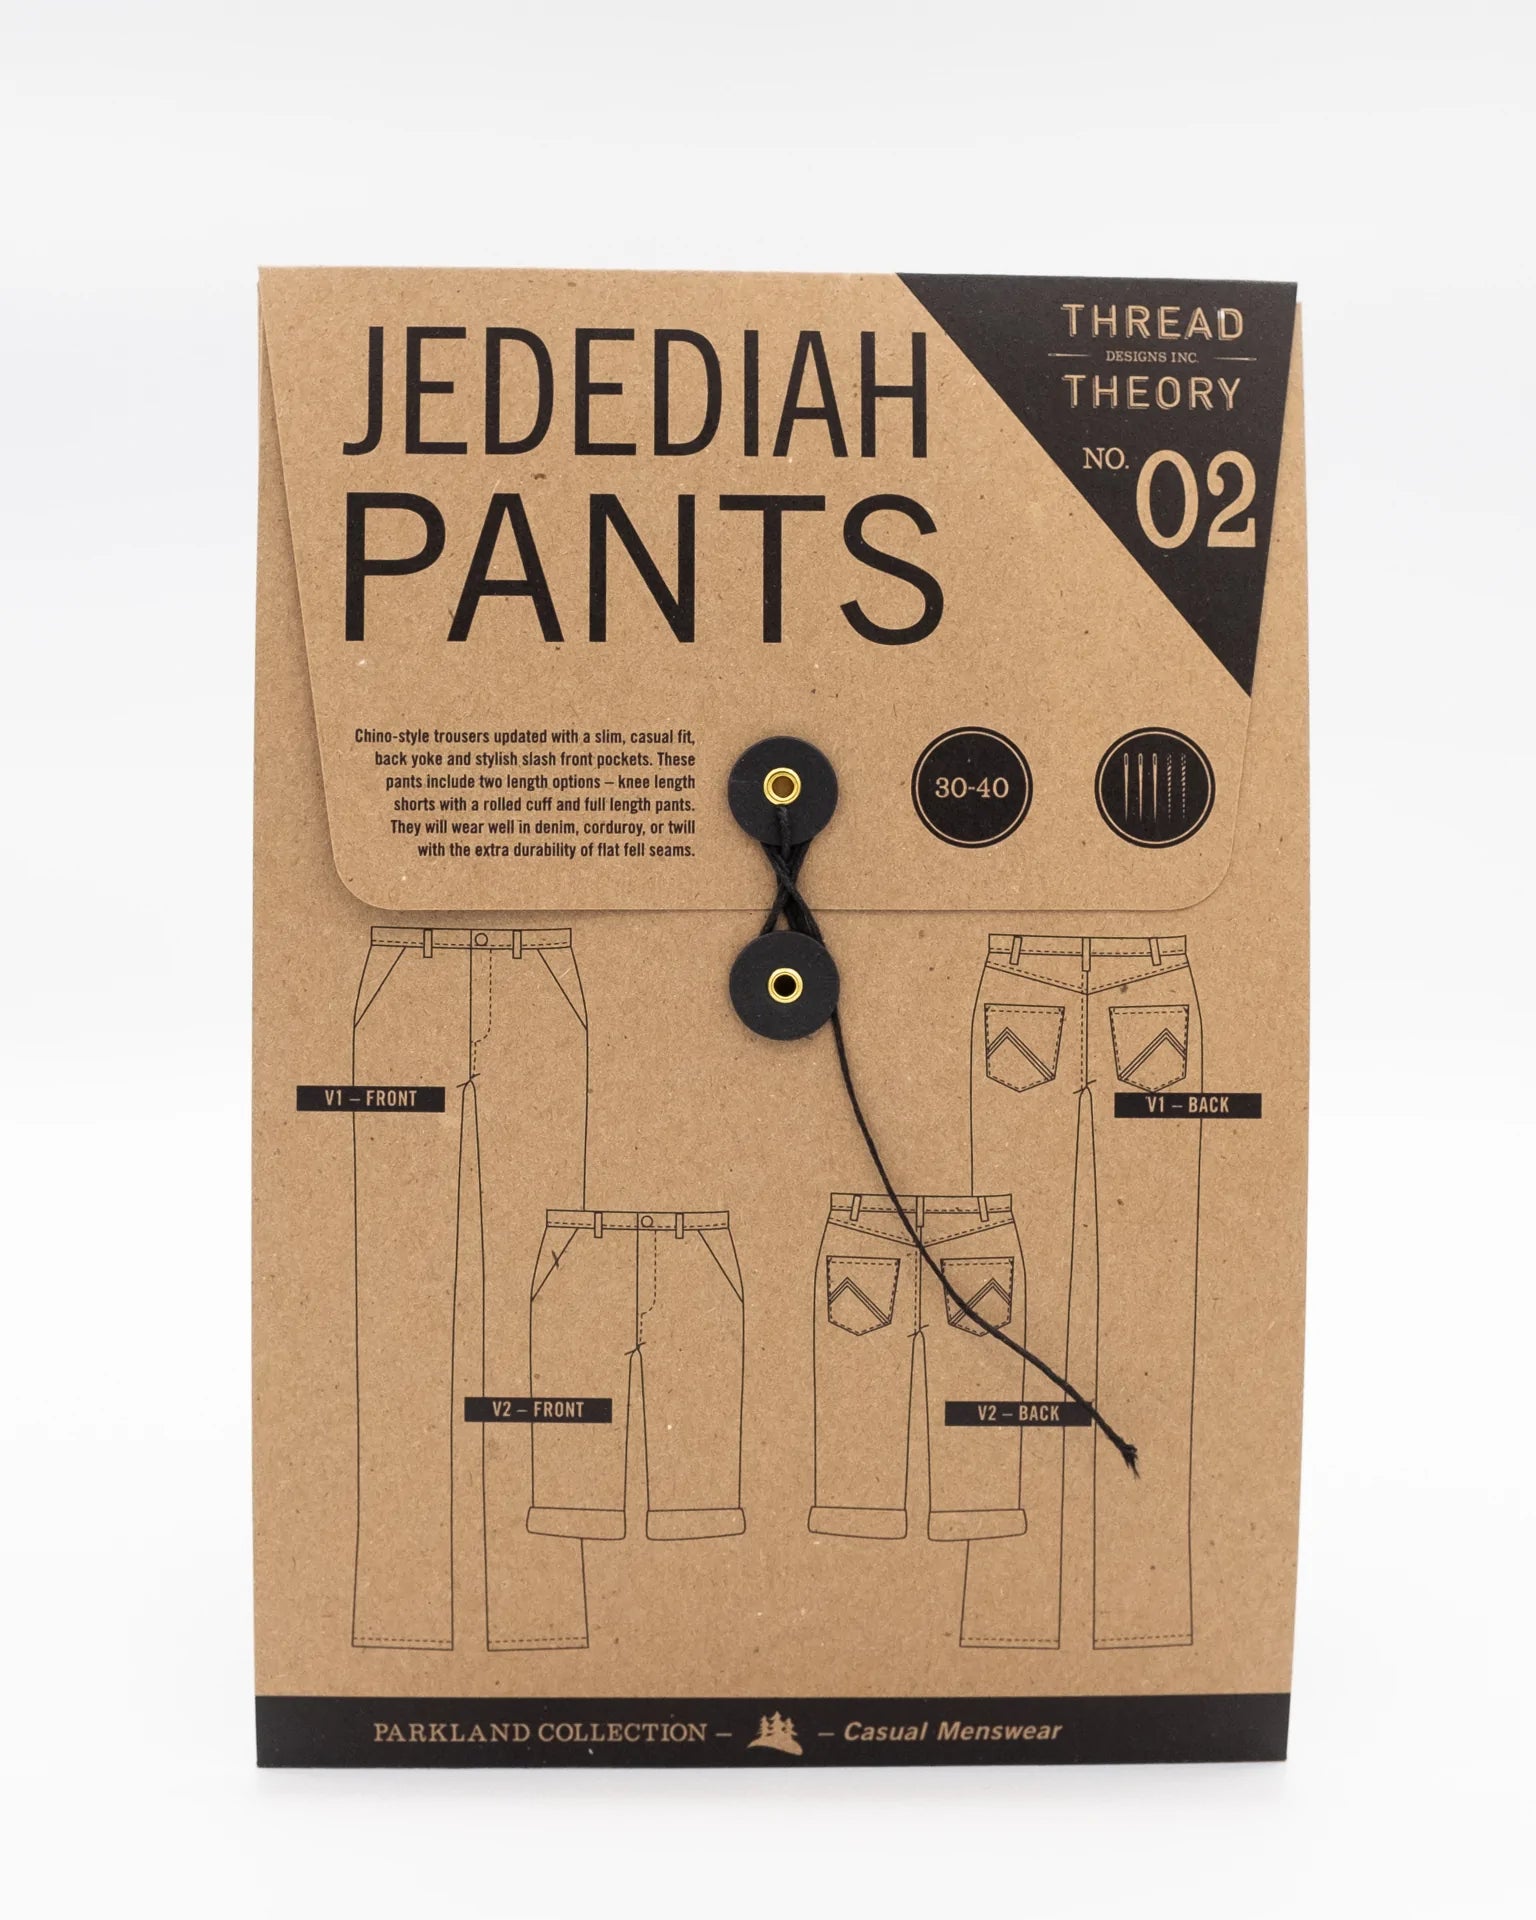 Thread Theory No 02 Jedediah Pants (Trousers)